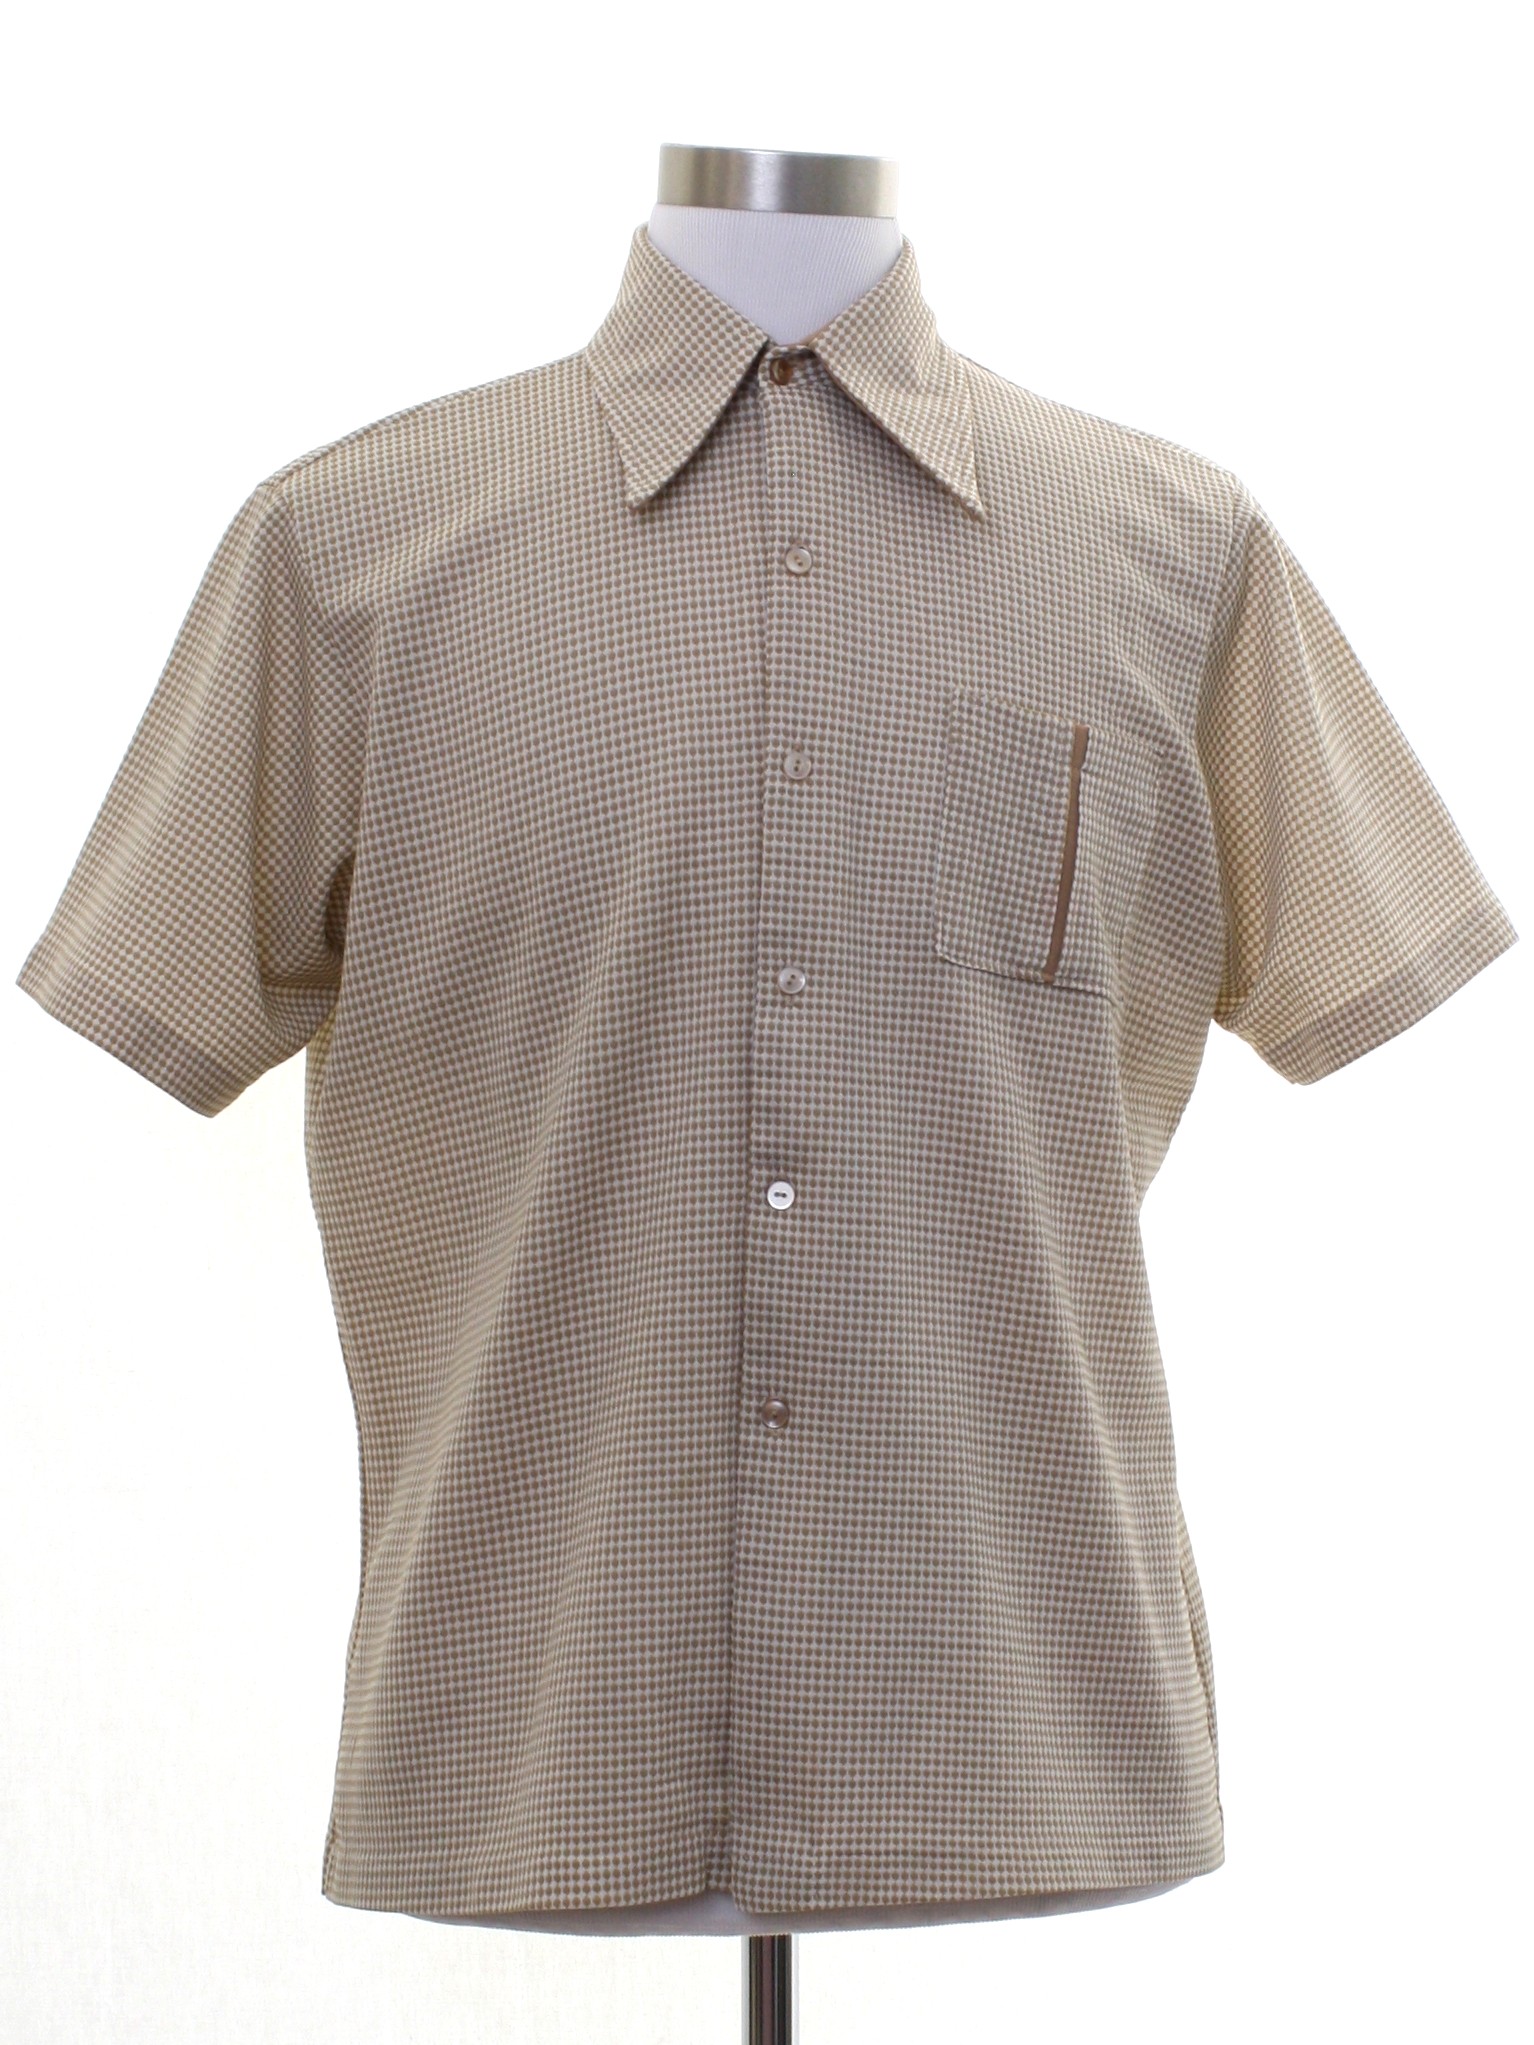 JC Penney Towncraft 70's Vintage Shirt: 70s -JC Penney Towncraft- Mens ...